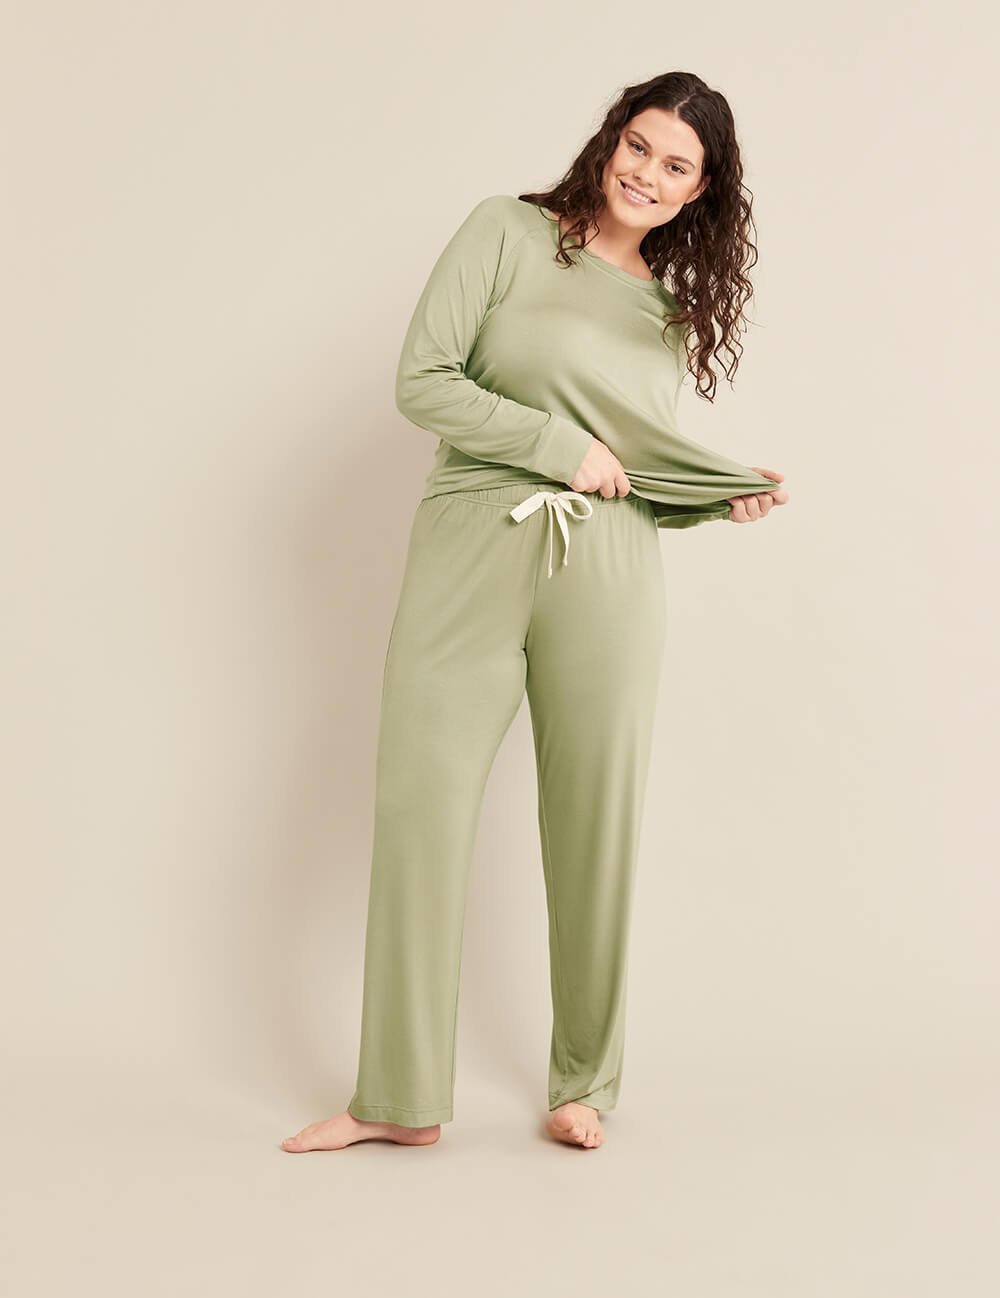 Boody Women's Goodnight Sleep Pant in Sage Green Front